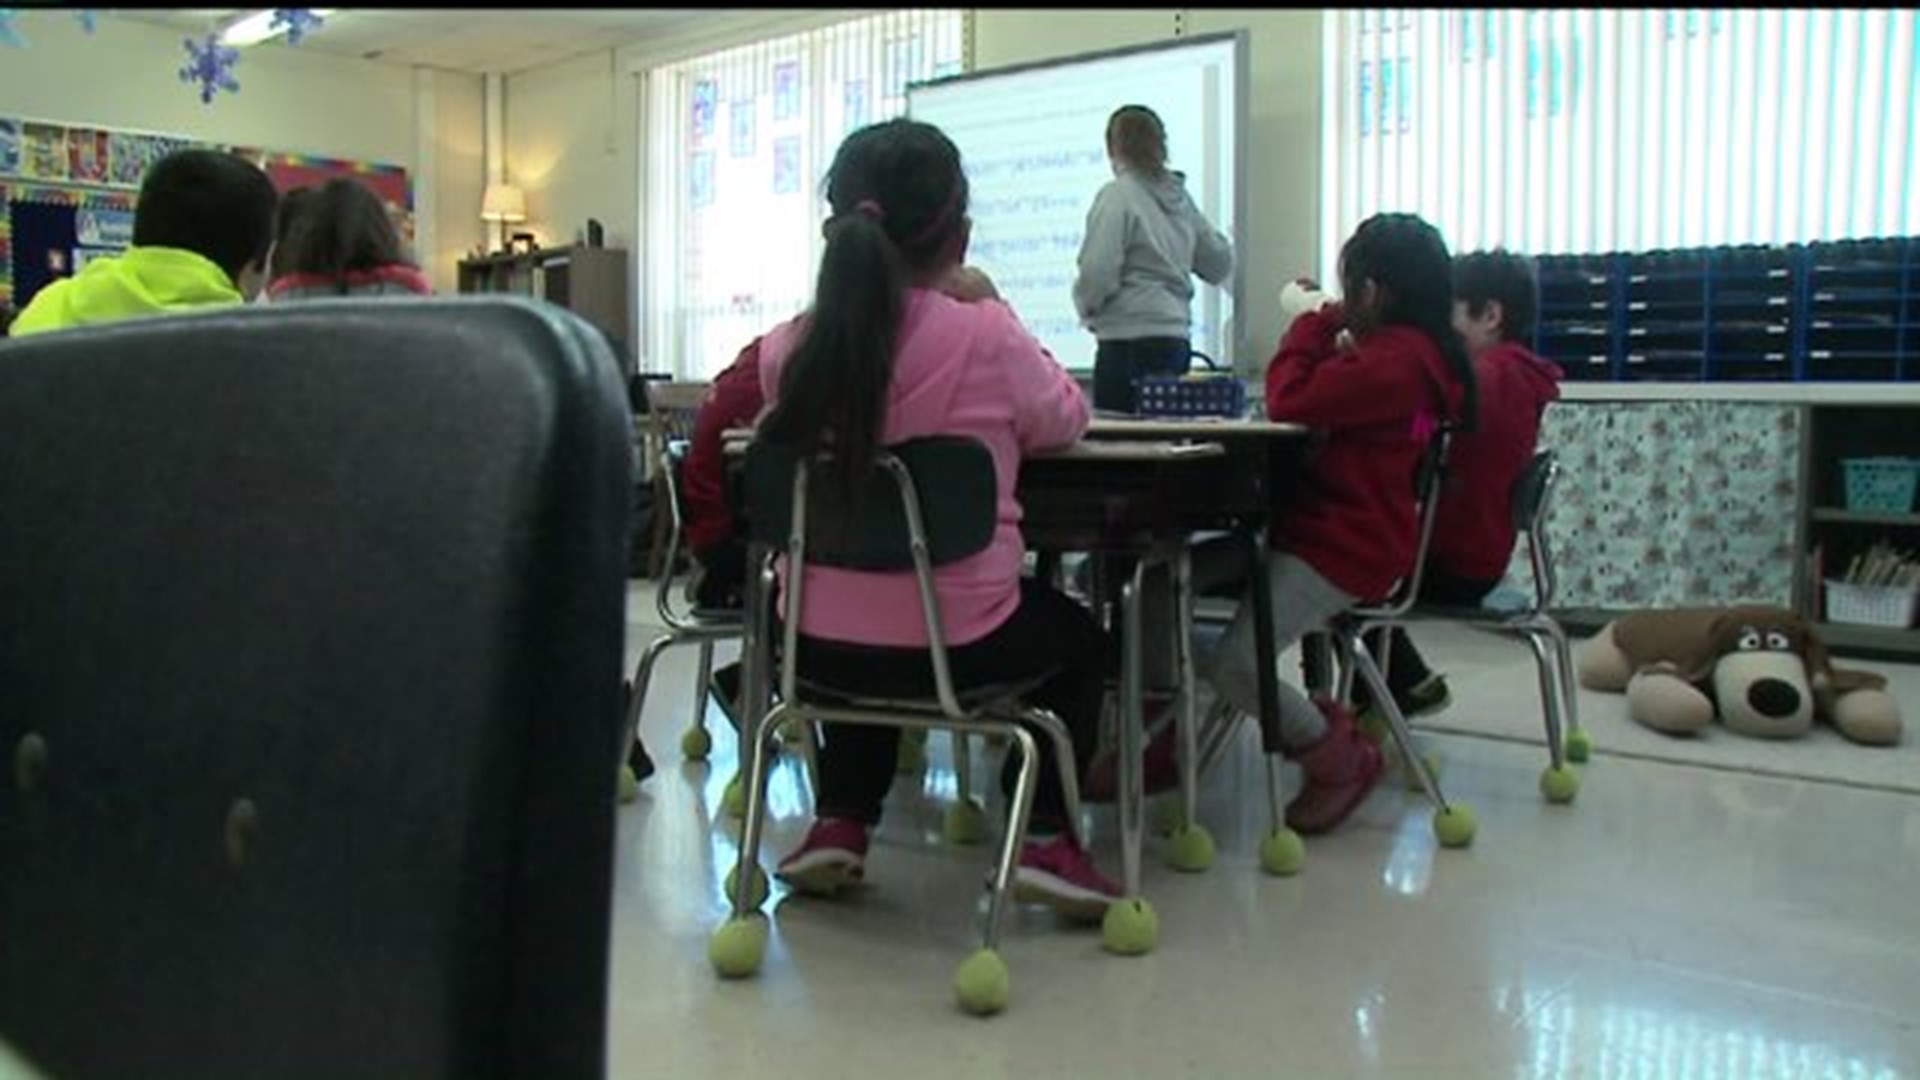 30 different languages taxing for diverse East Moline schools